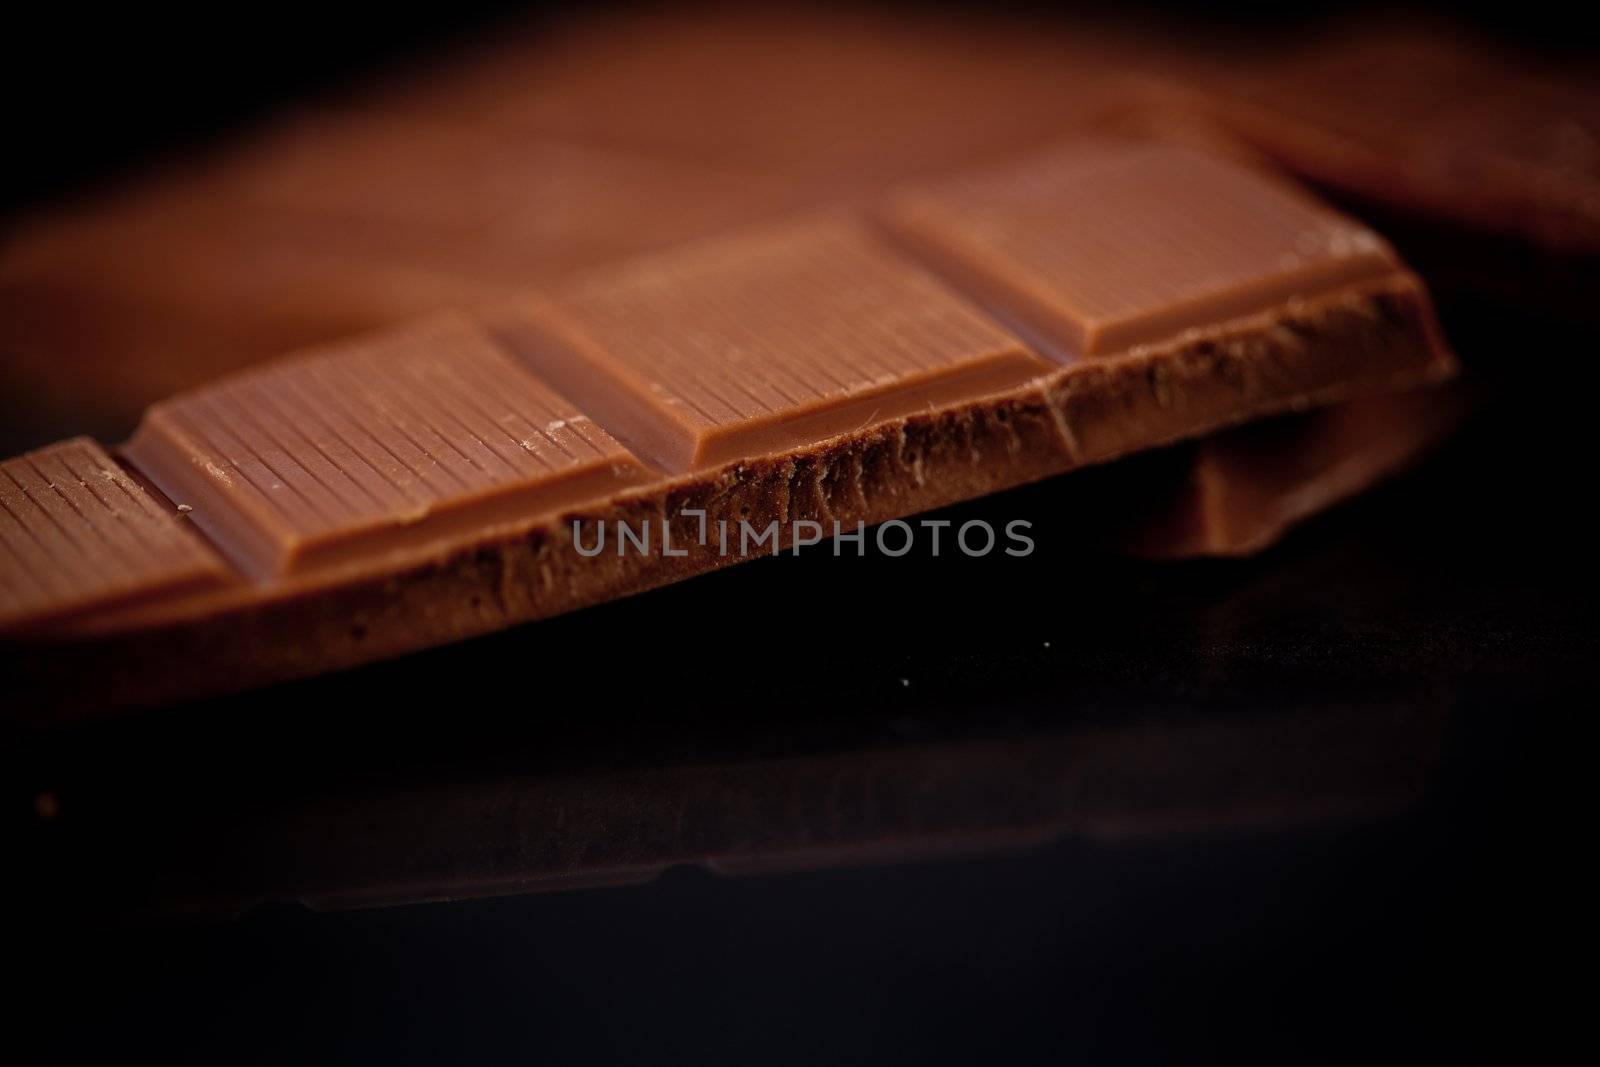 Chocolate bar lying on chocolate against a black background